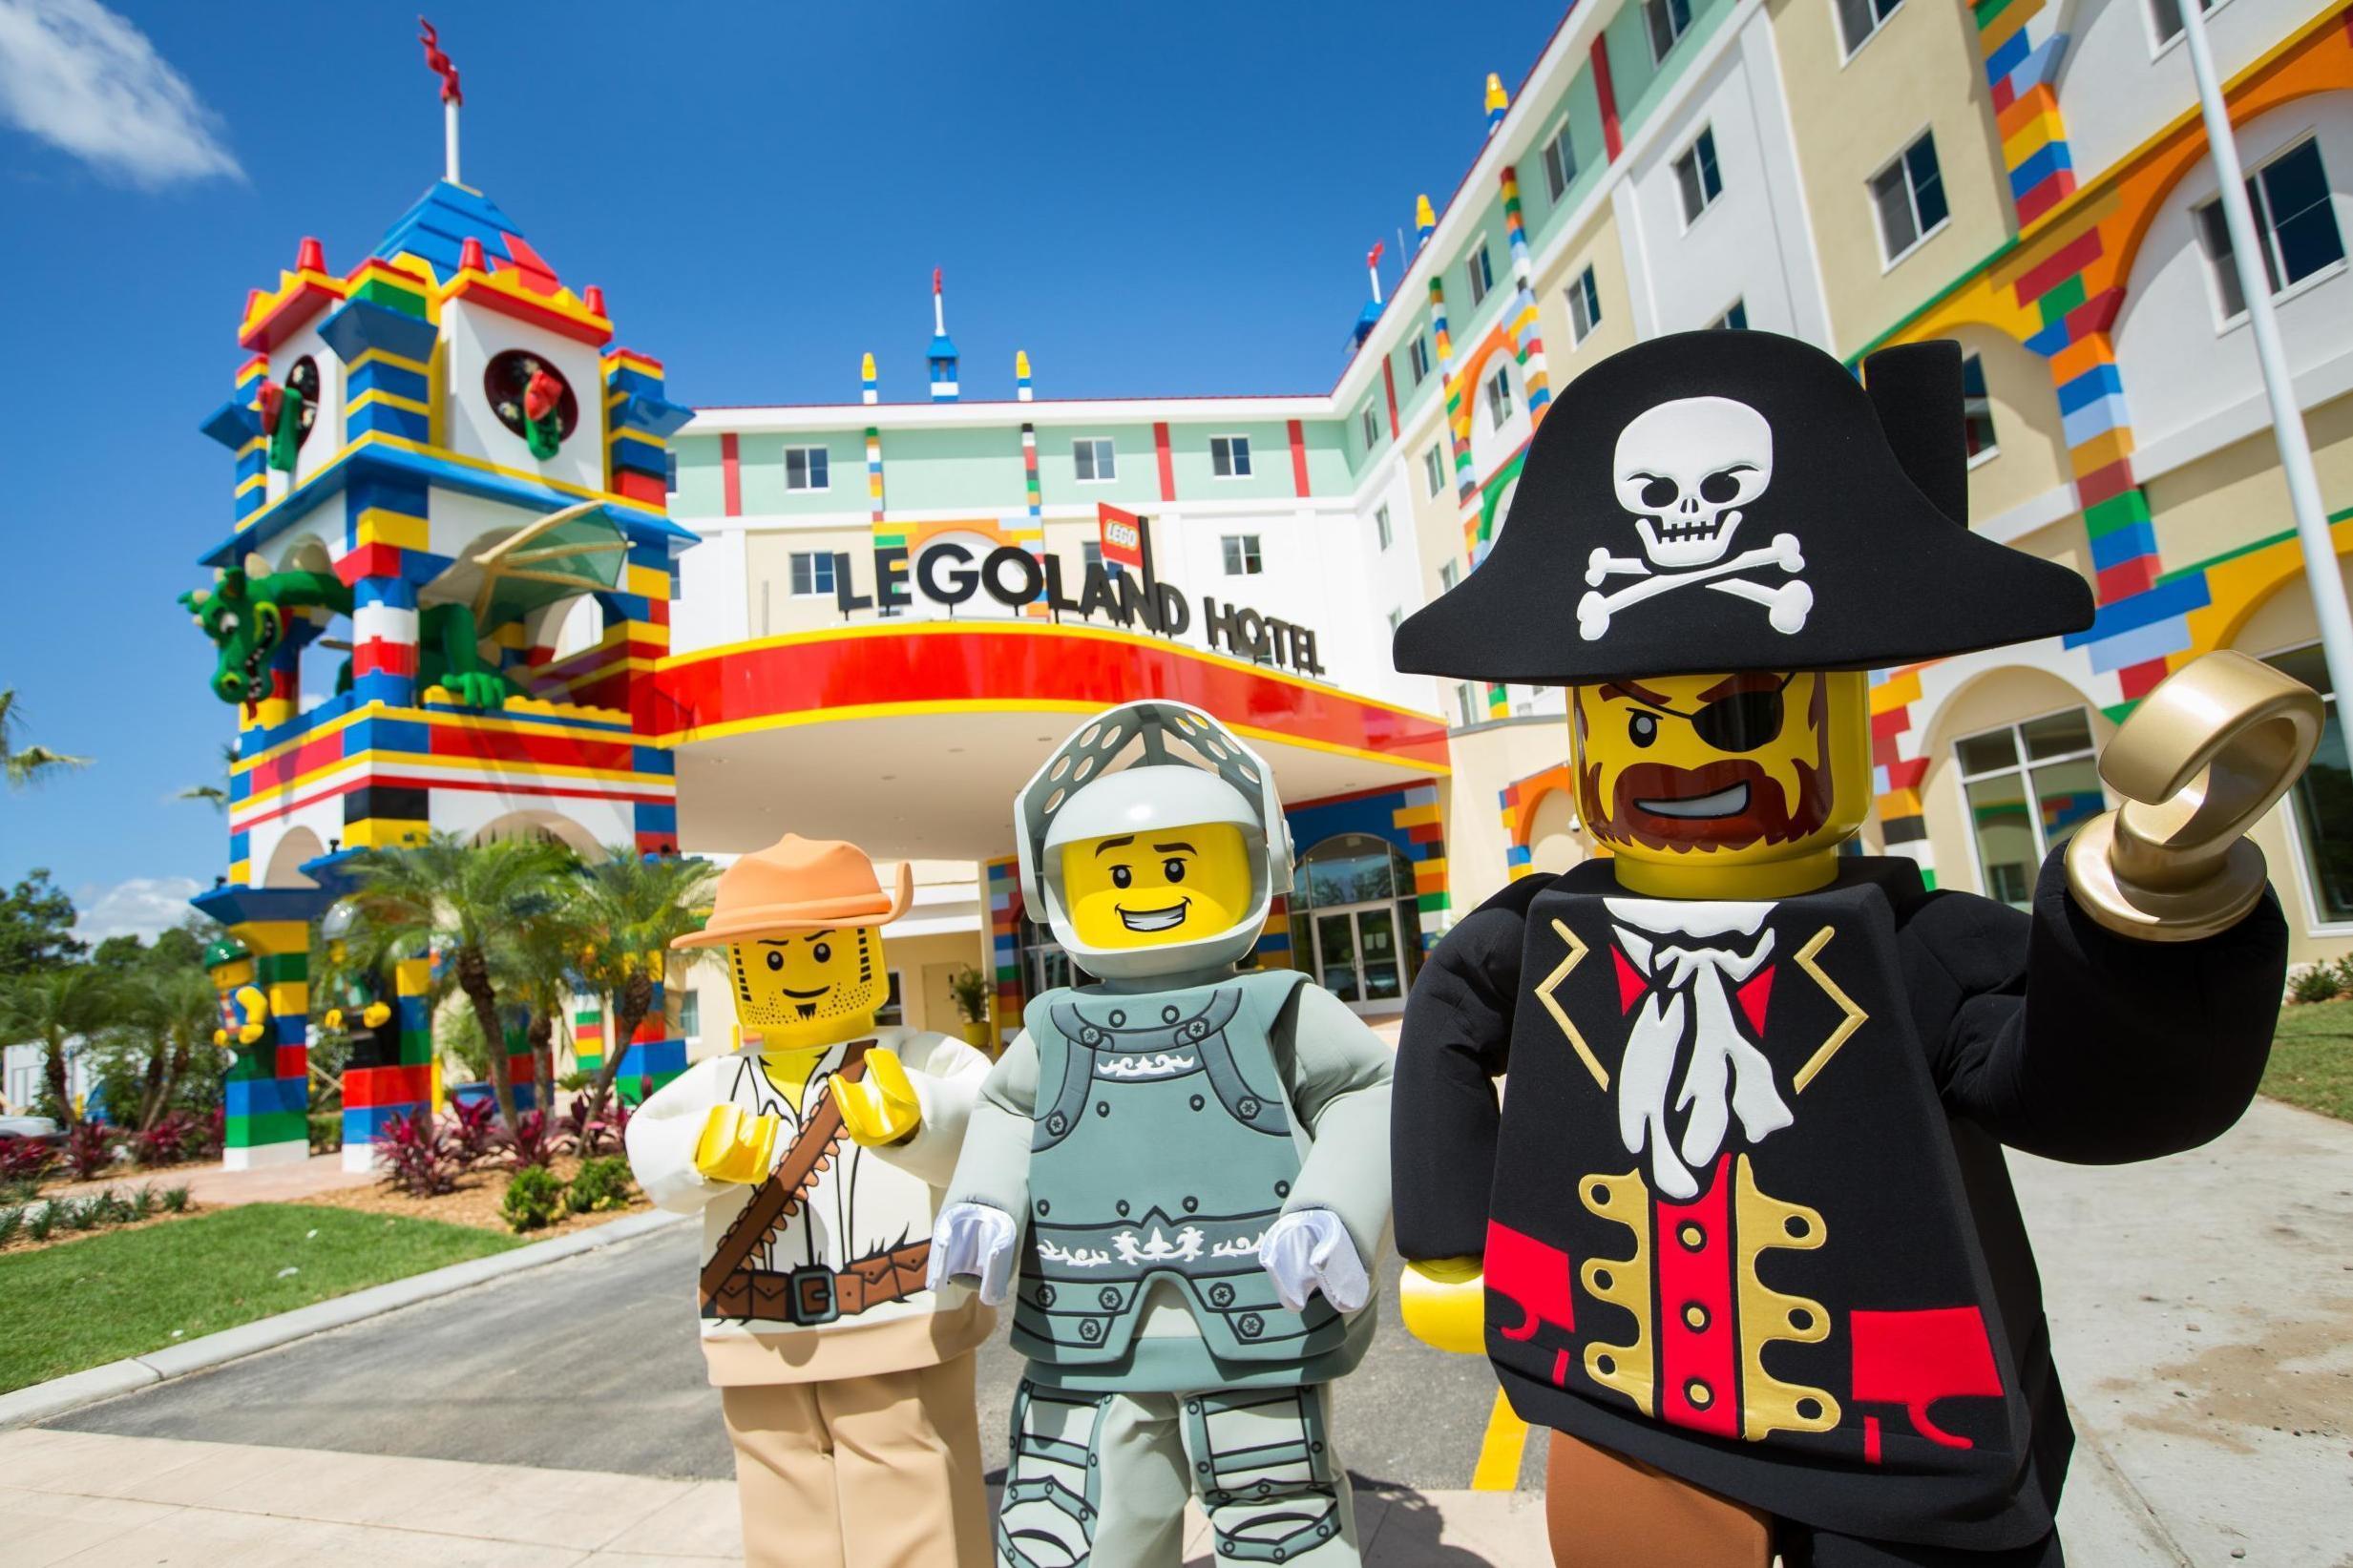 LEGO, the LEGO logo, the minifigure and LEGOLAND are trademarks of The LEGO Group.©2018 The LEGO Group